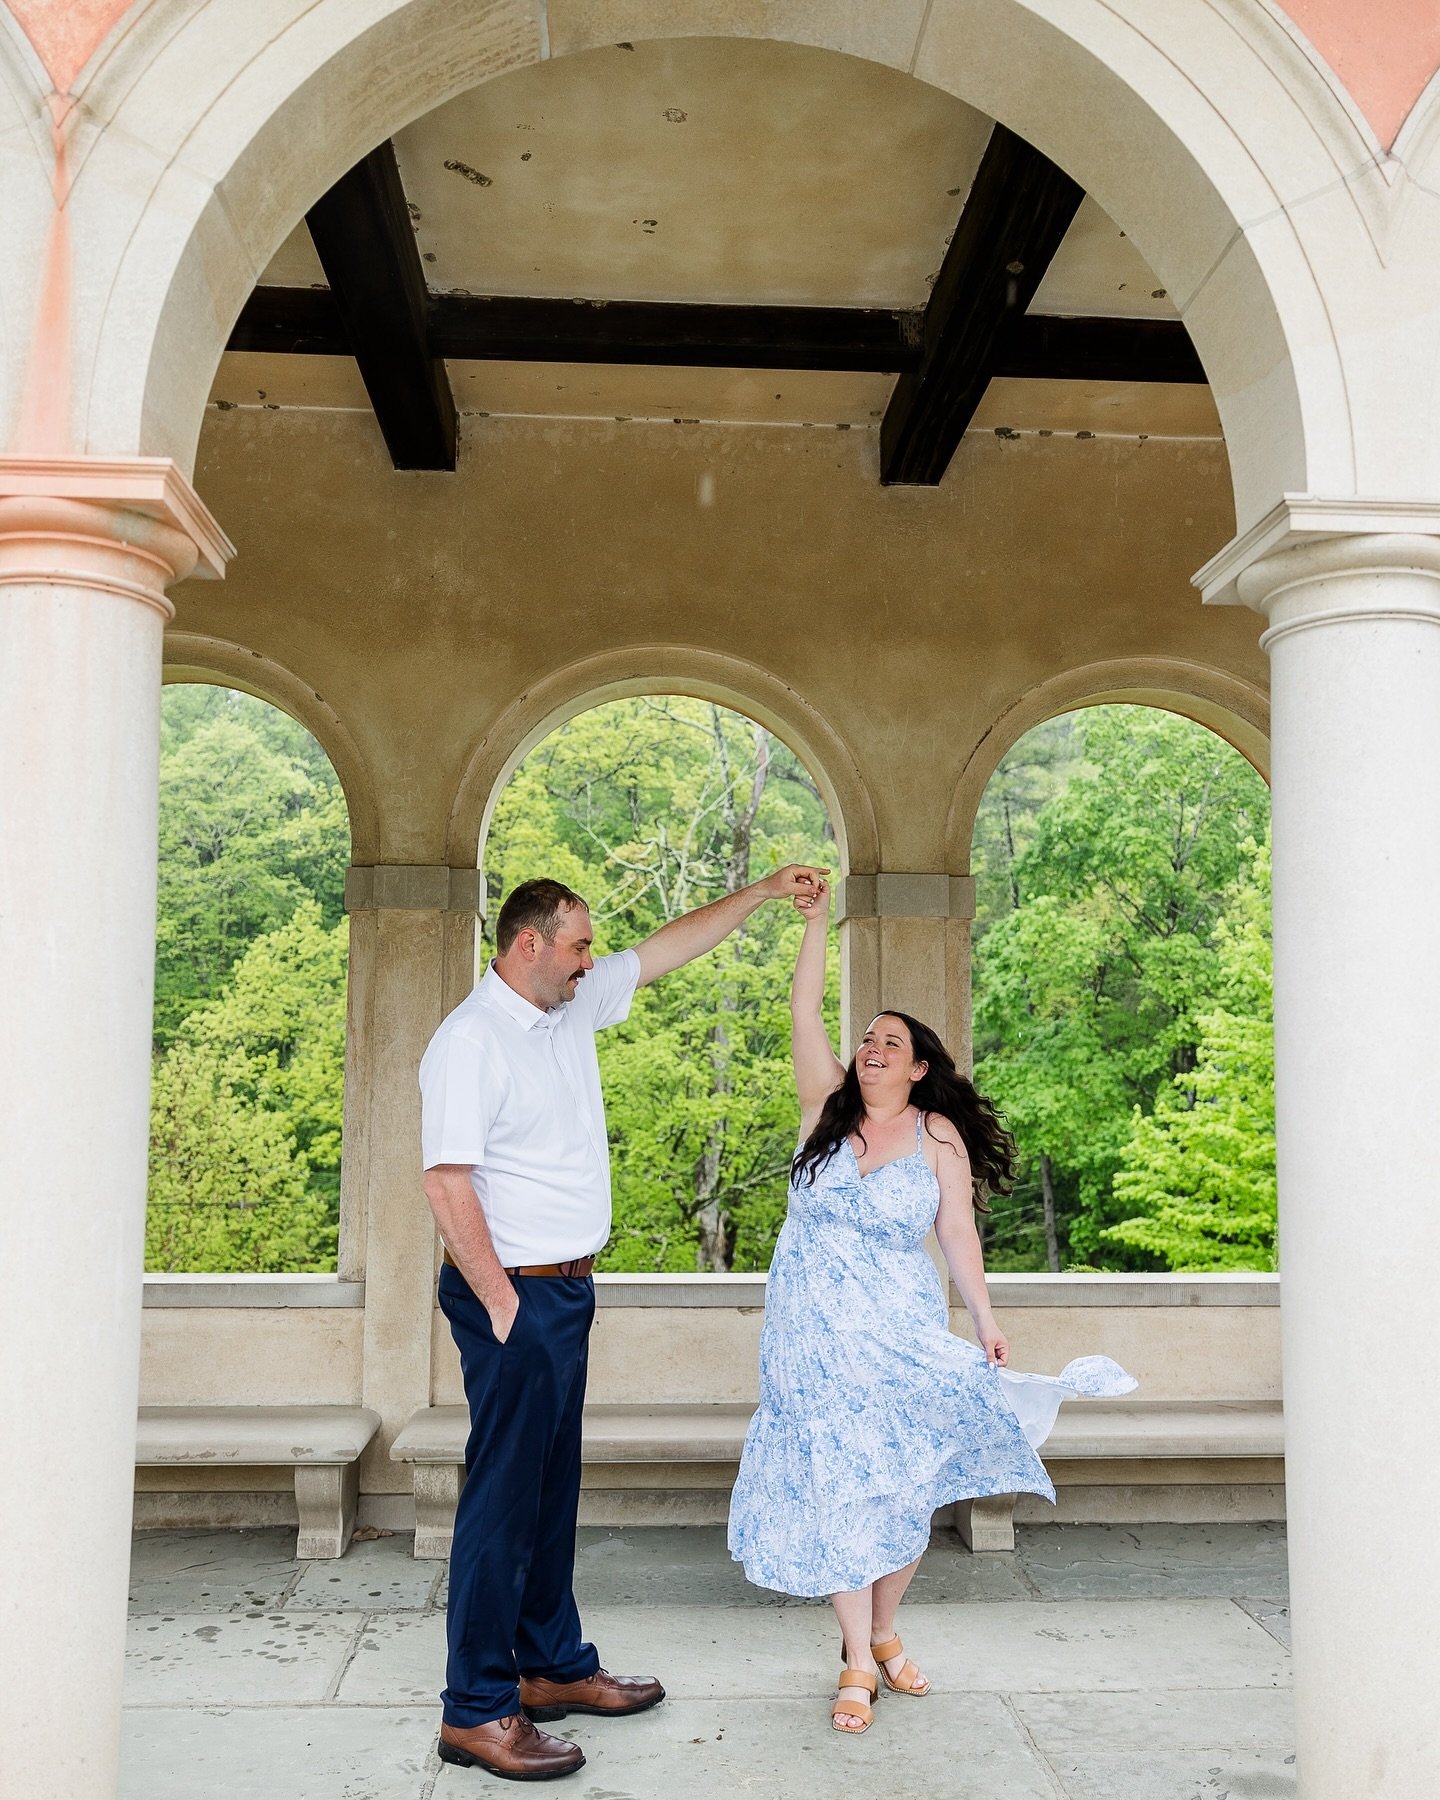 One year to go until these two say I do! Can&rsquo;t wait to party with T &amp; T in 365 days! 

#hudsonvalleyweddings #westchesterweddingphotographer #upstatenywedding #2025weddingphotographer #catskillsweddings #saratogaweddingphotographer #518wedd